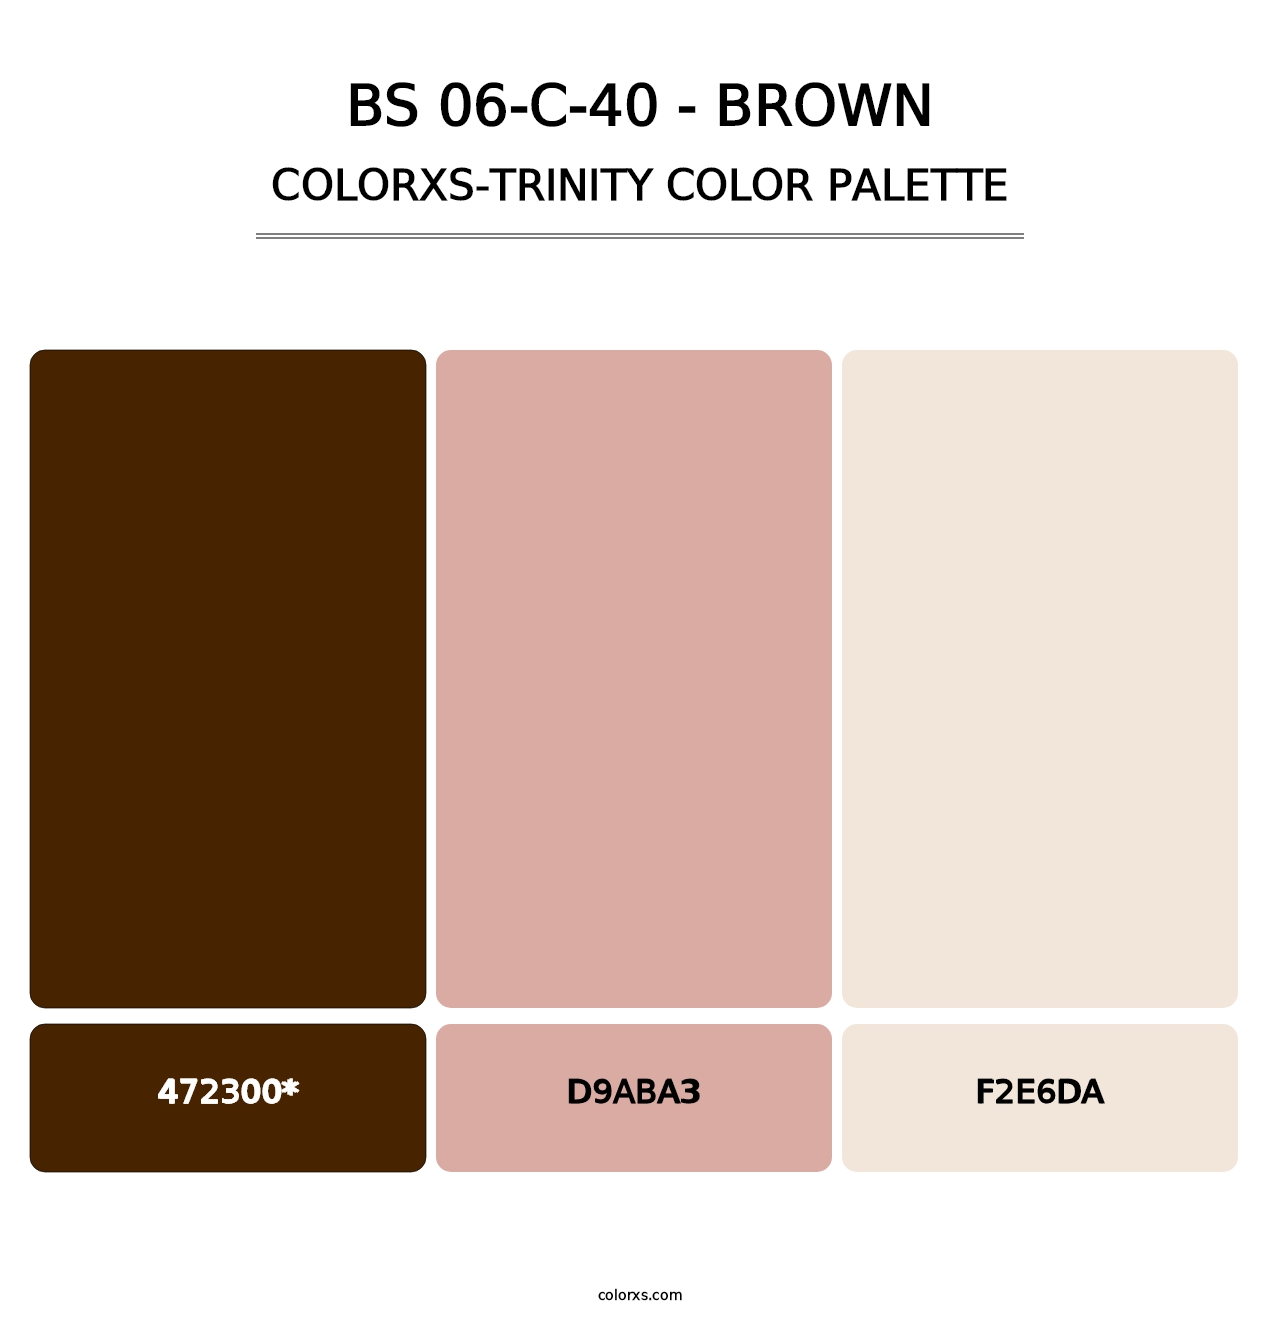 BS 06-C-40 - Brown - Colorxs Trinity Palette